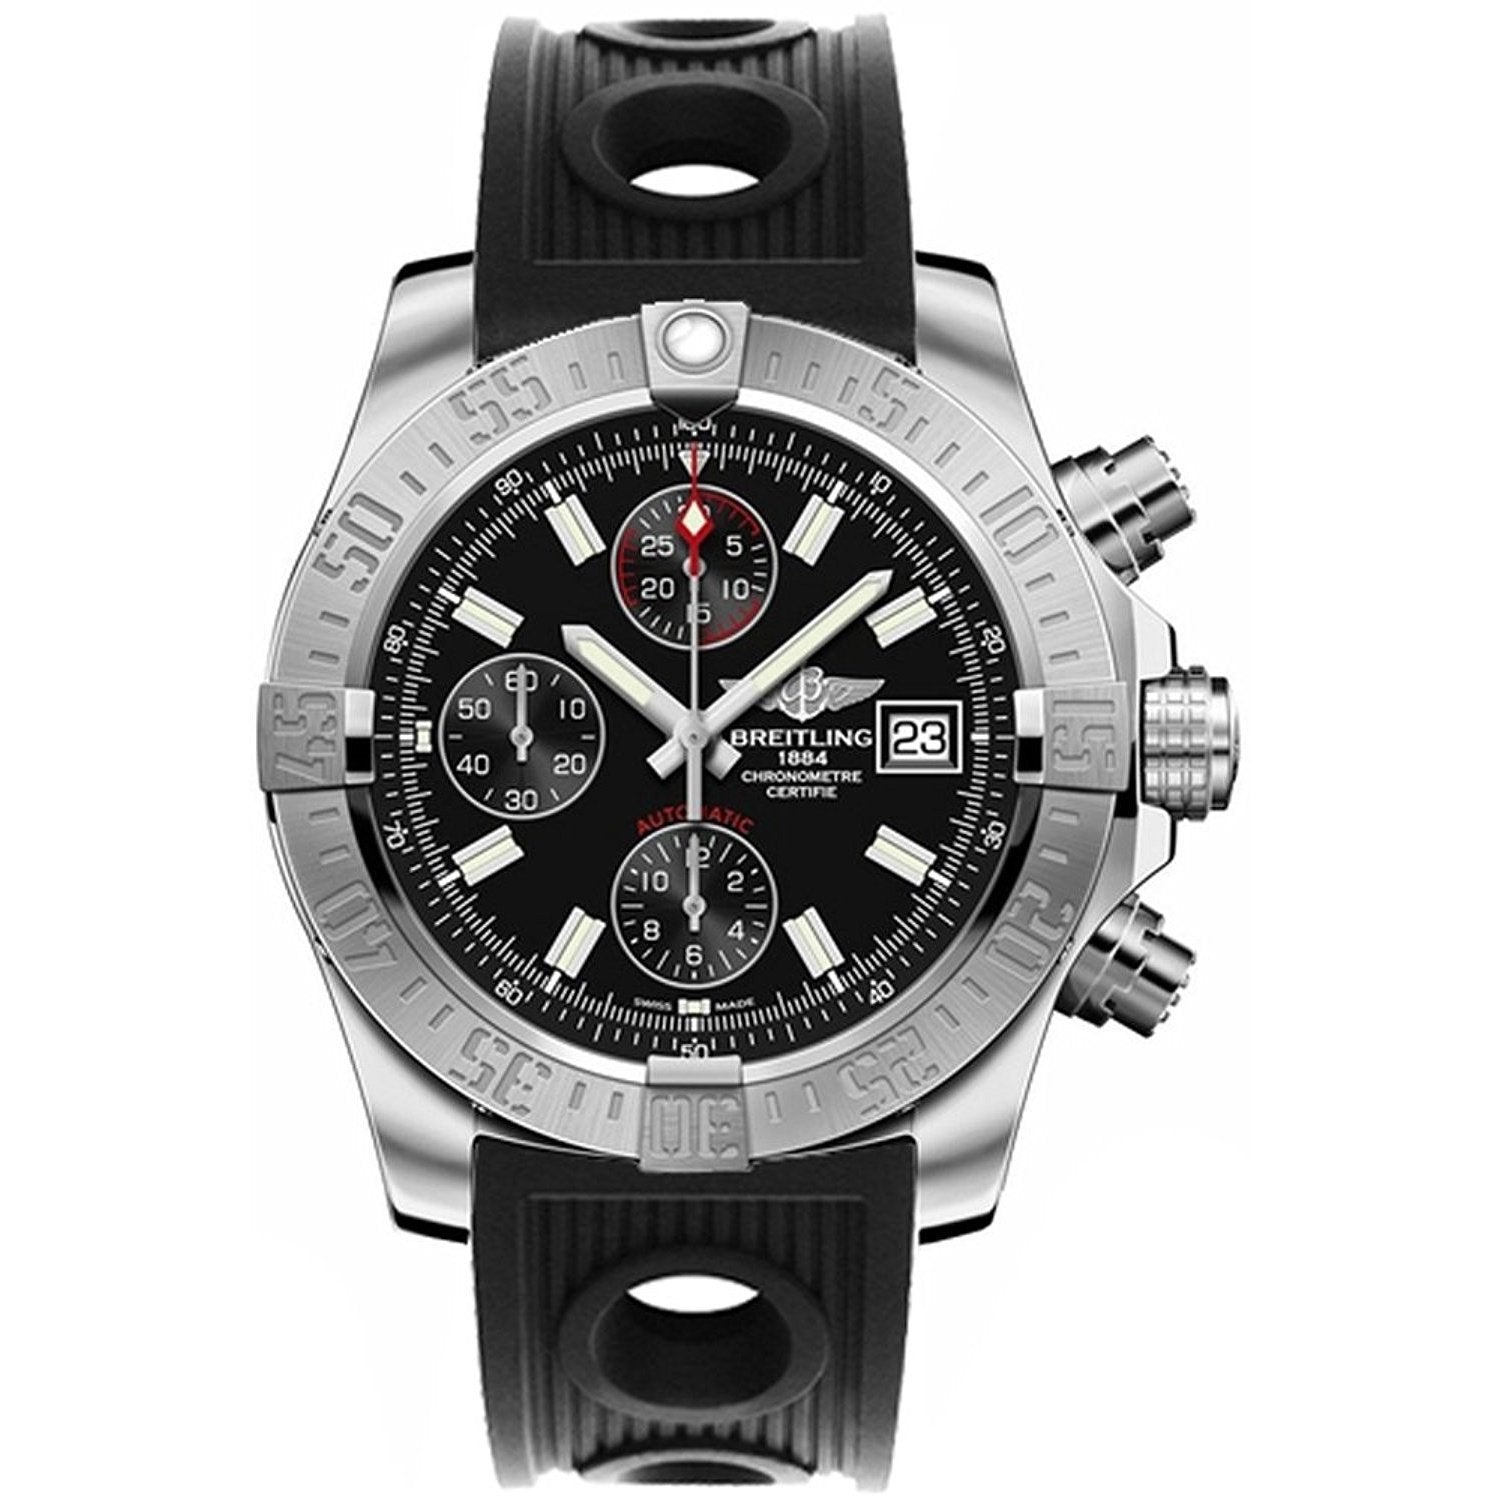 Breitling Men's A4131012-G757SS Transocean 38 Automatic Chronograph Stainless Steel Watch